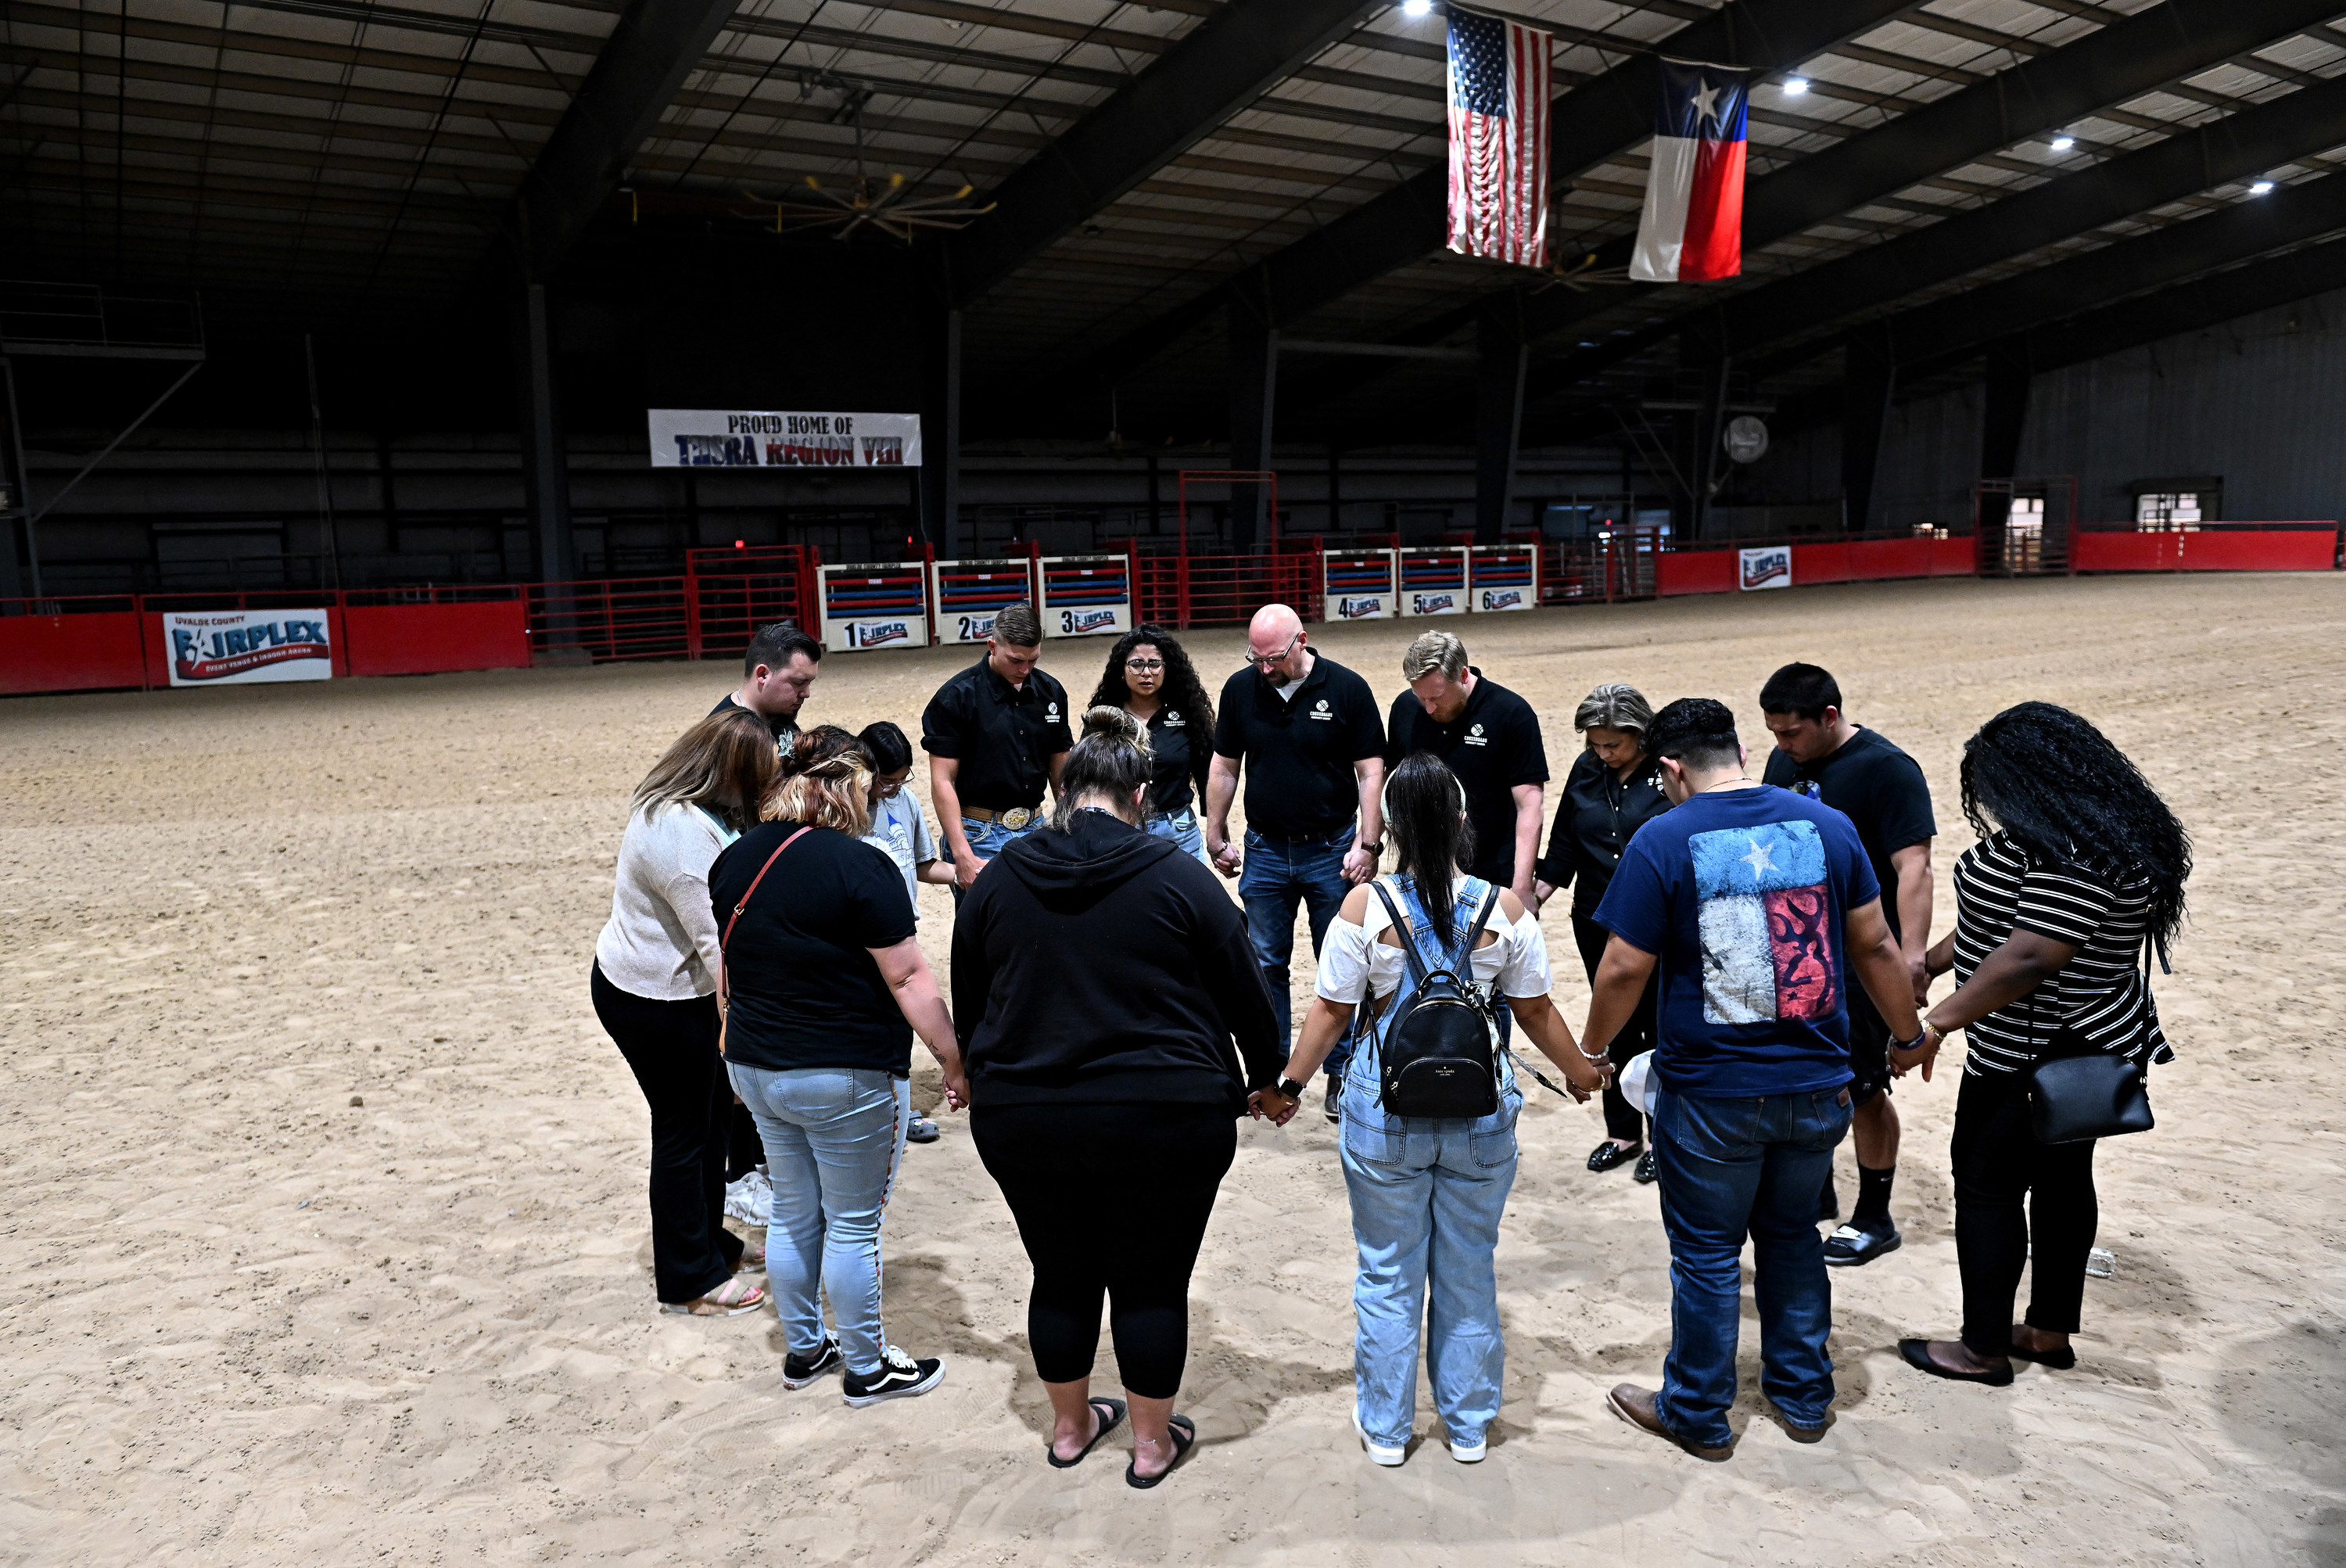 People hold hands and stand in a circle in a rodeo arena